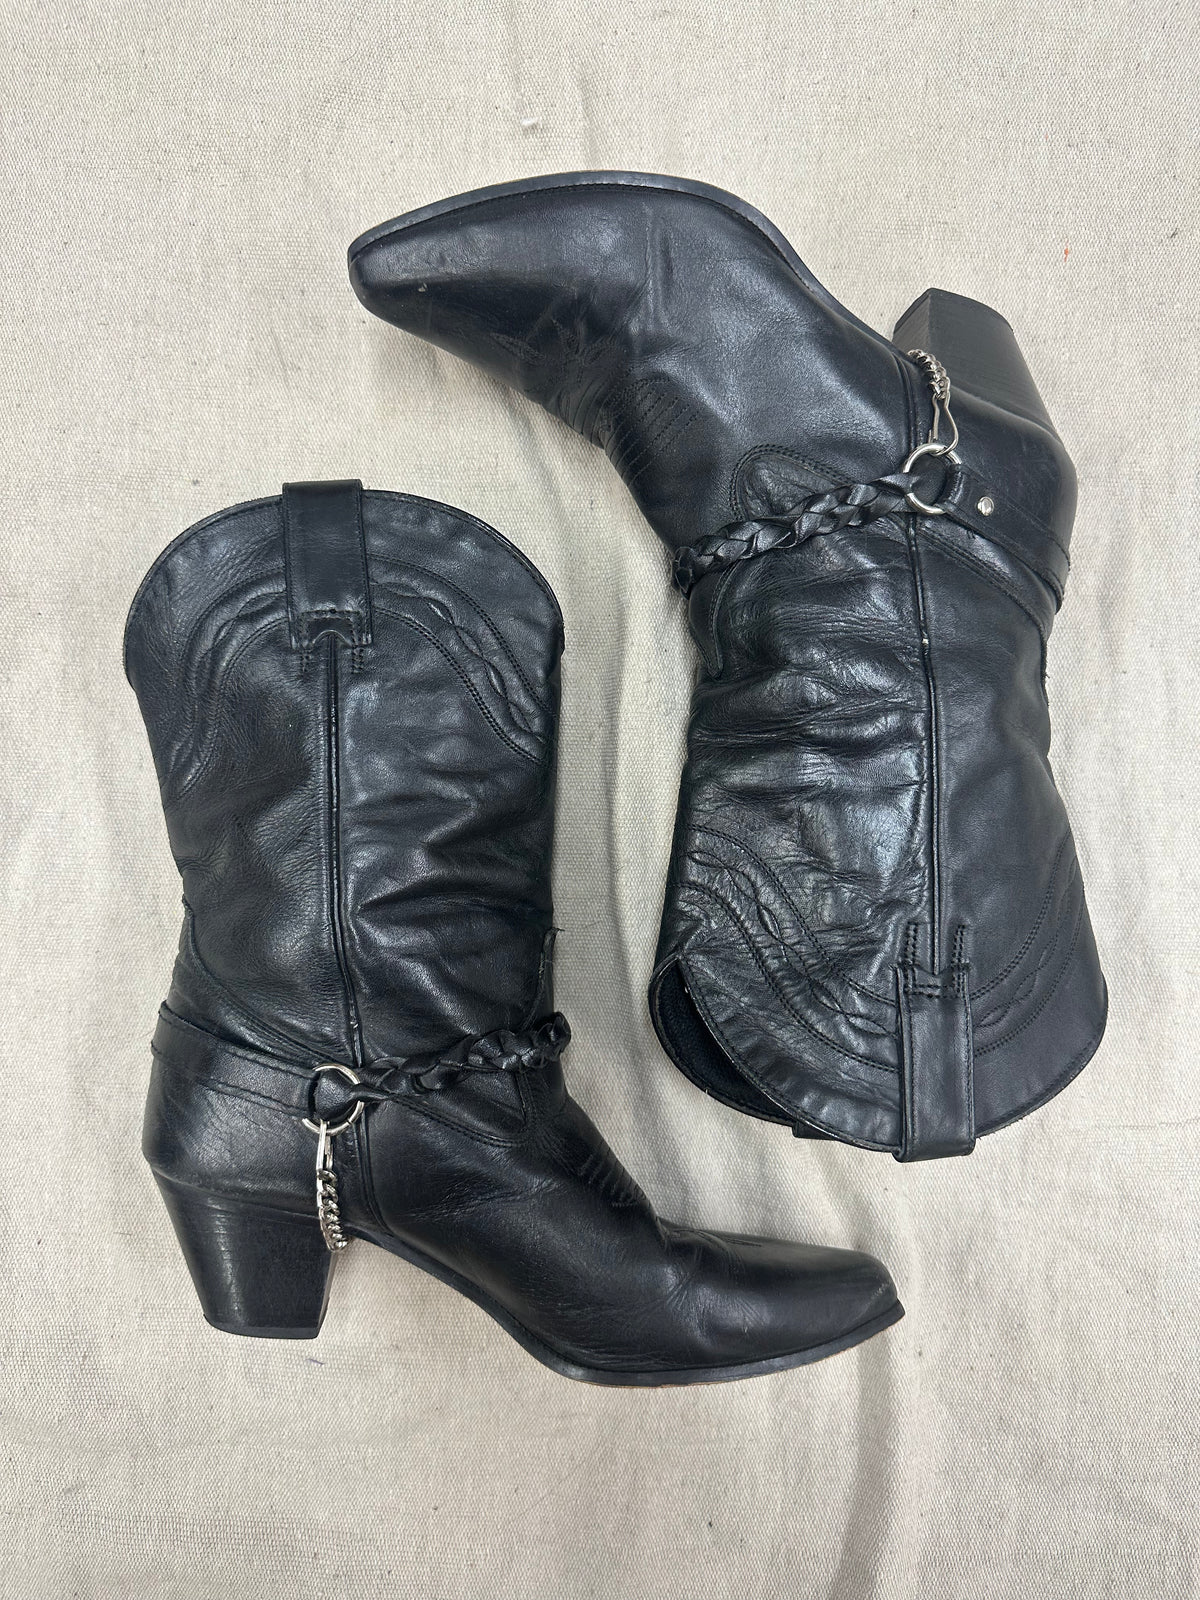 Vintage Black Cowboy Boots With Harness Detail